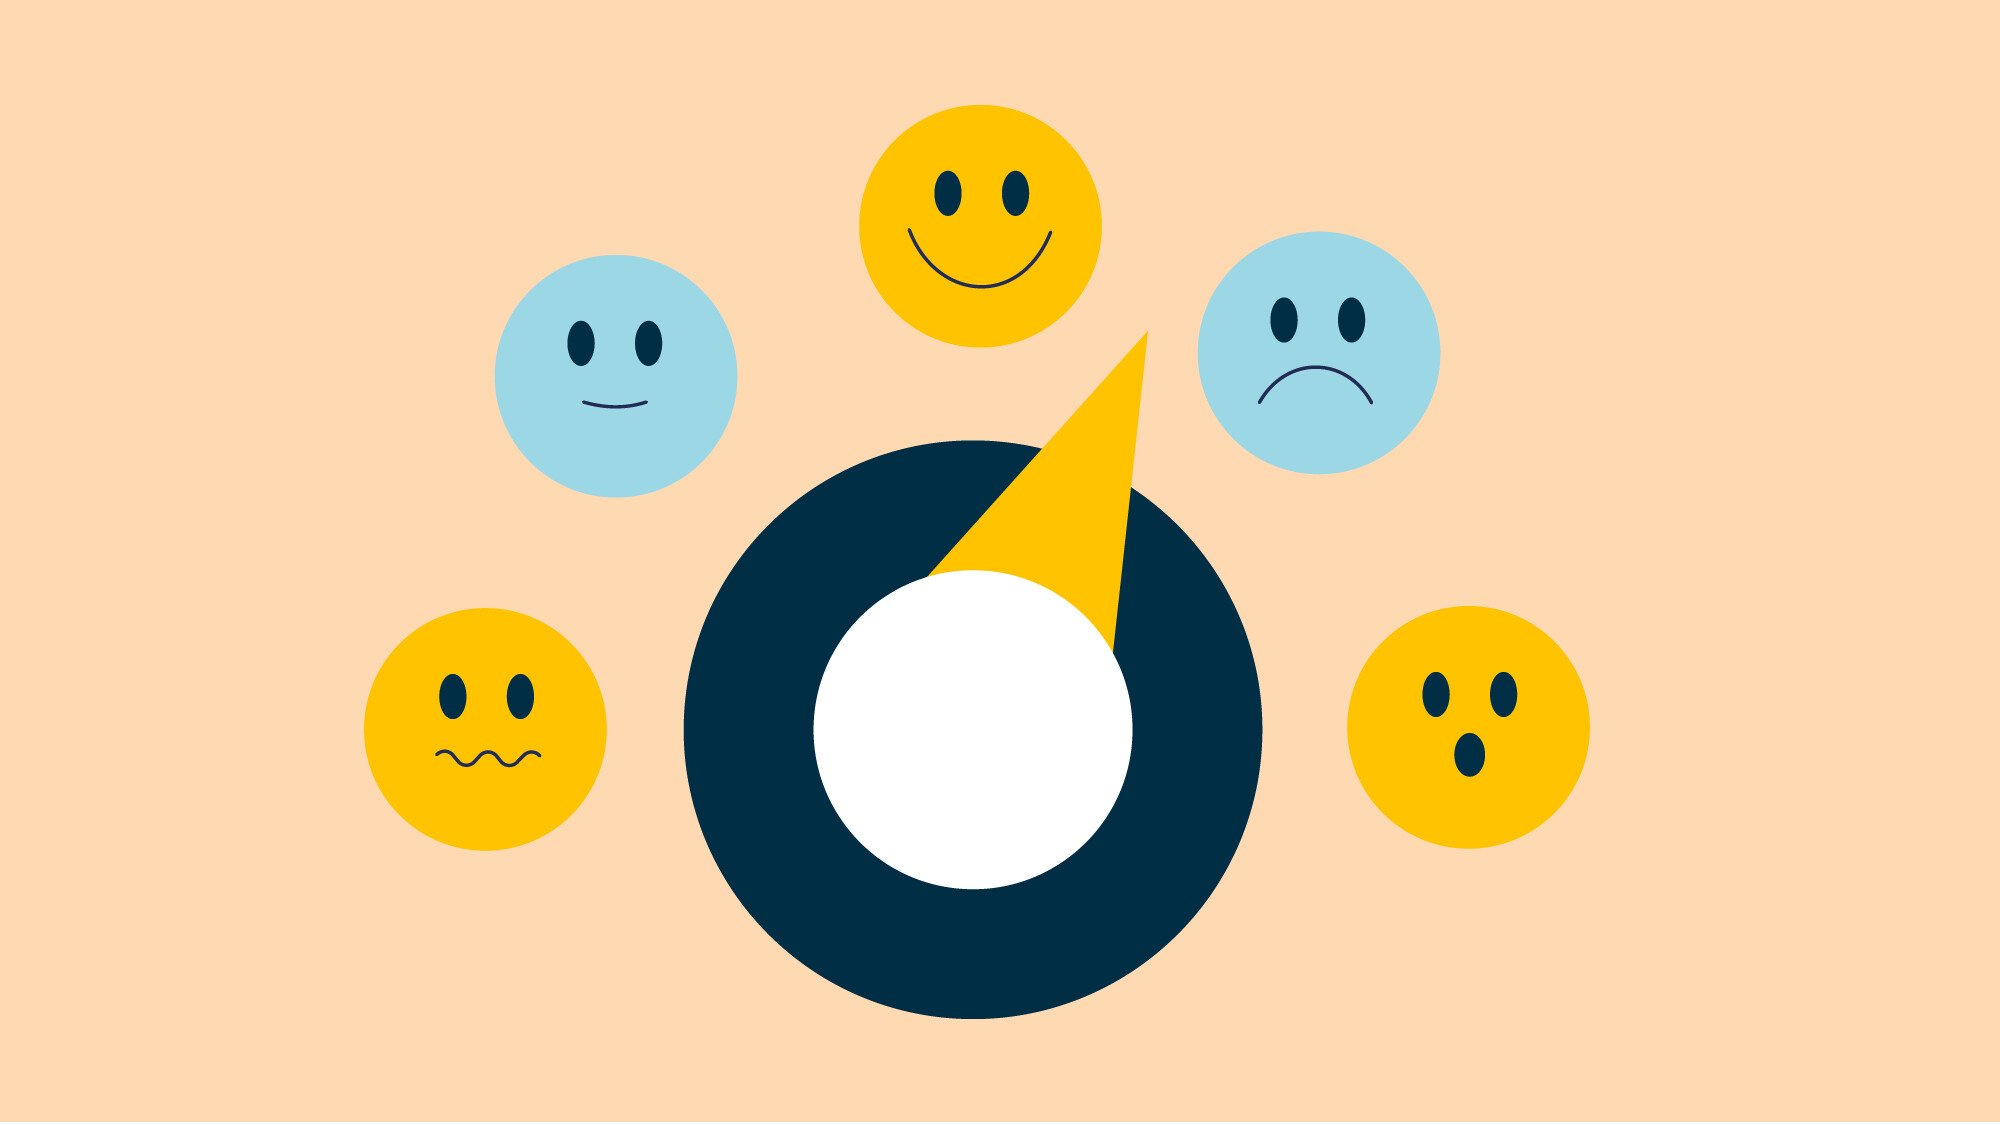 Illustration of a barometer with happy faces in yellow and sad faces in blue.